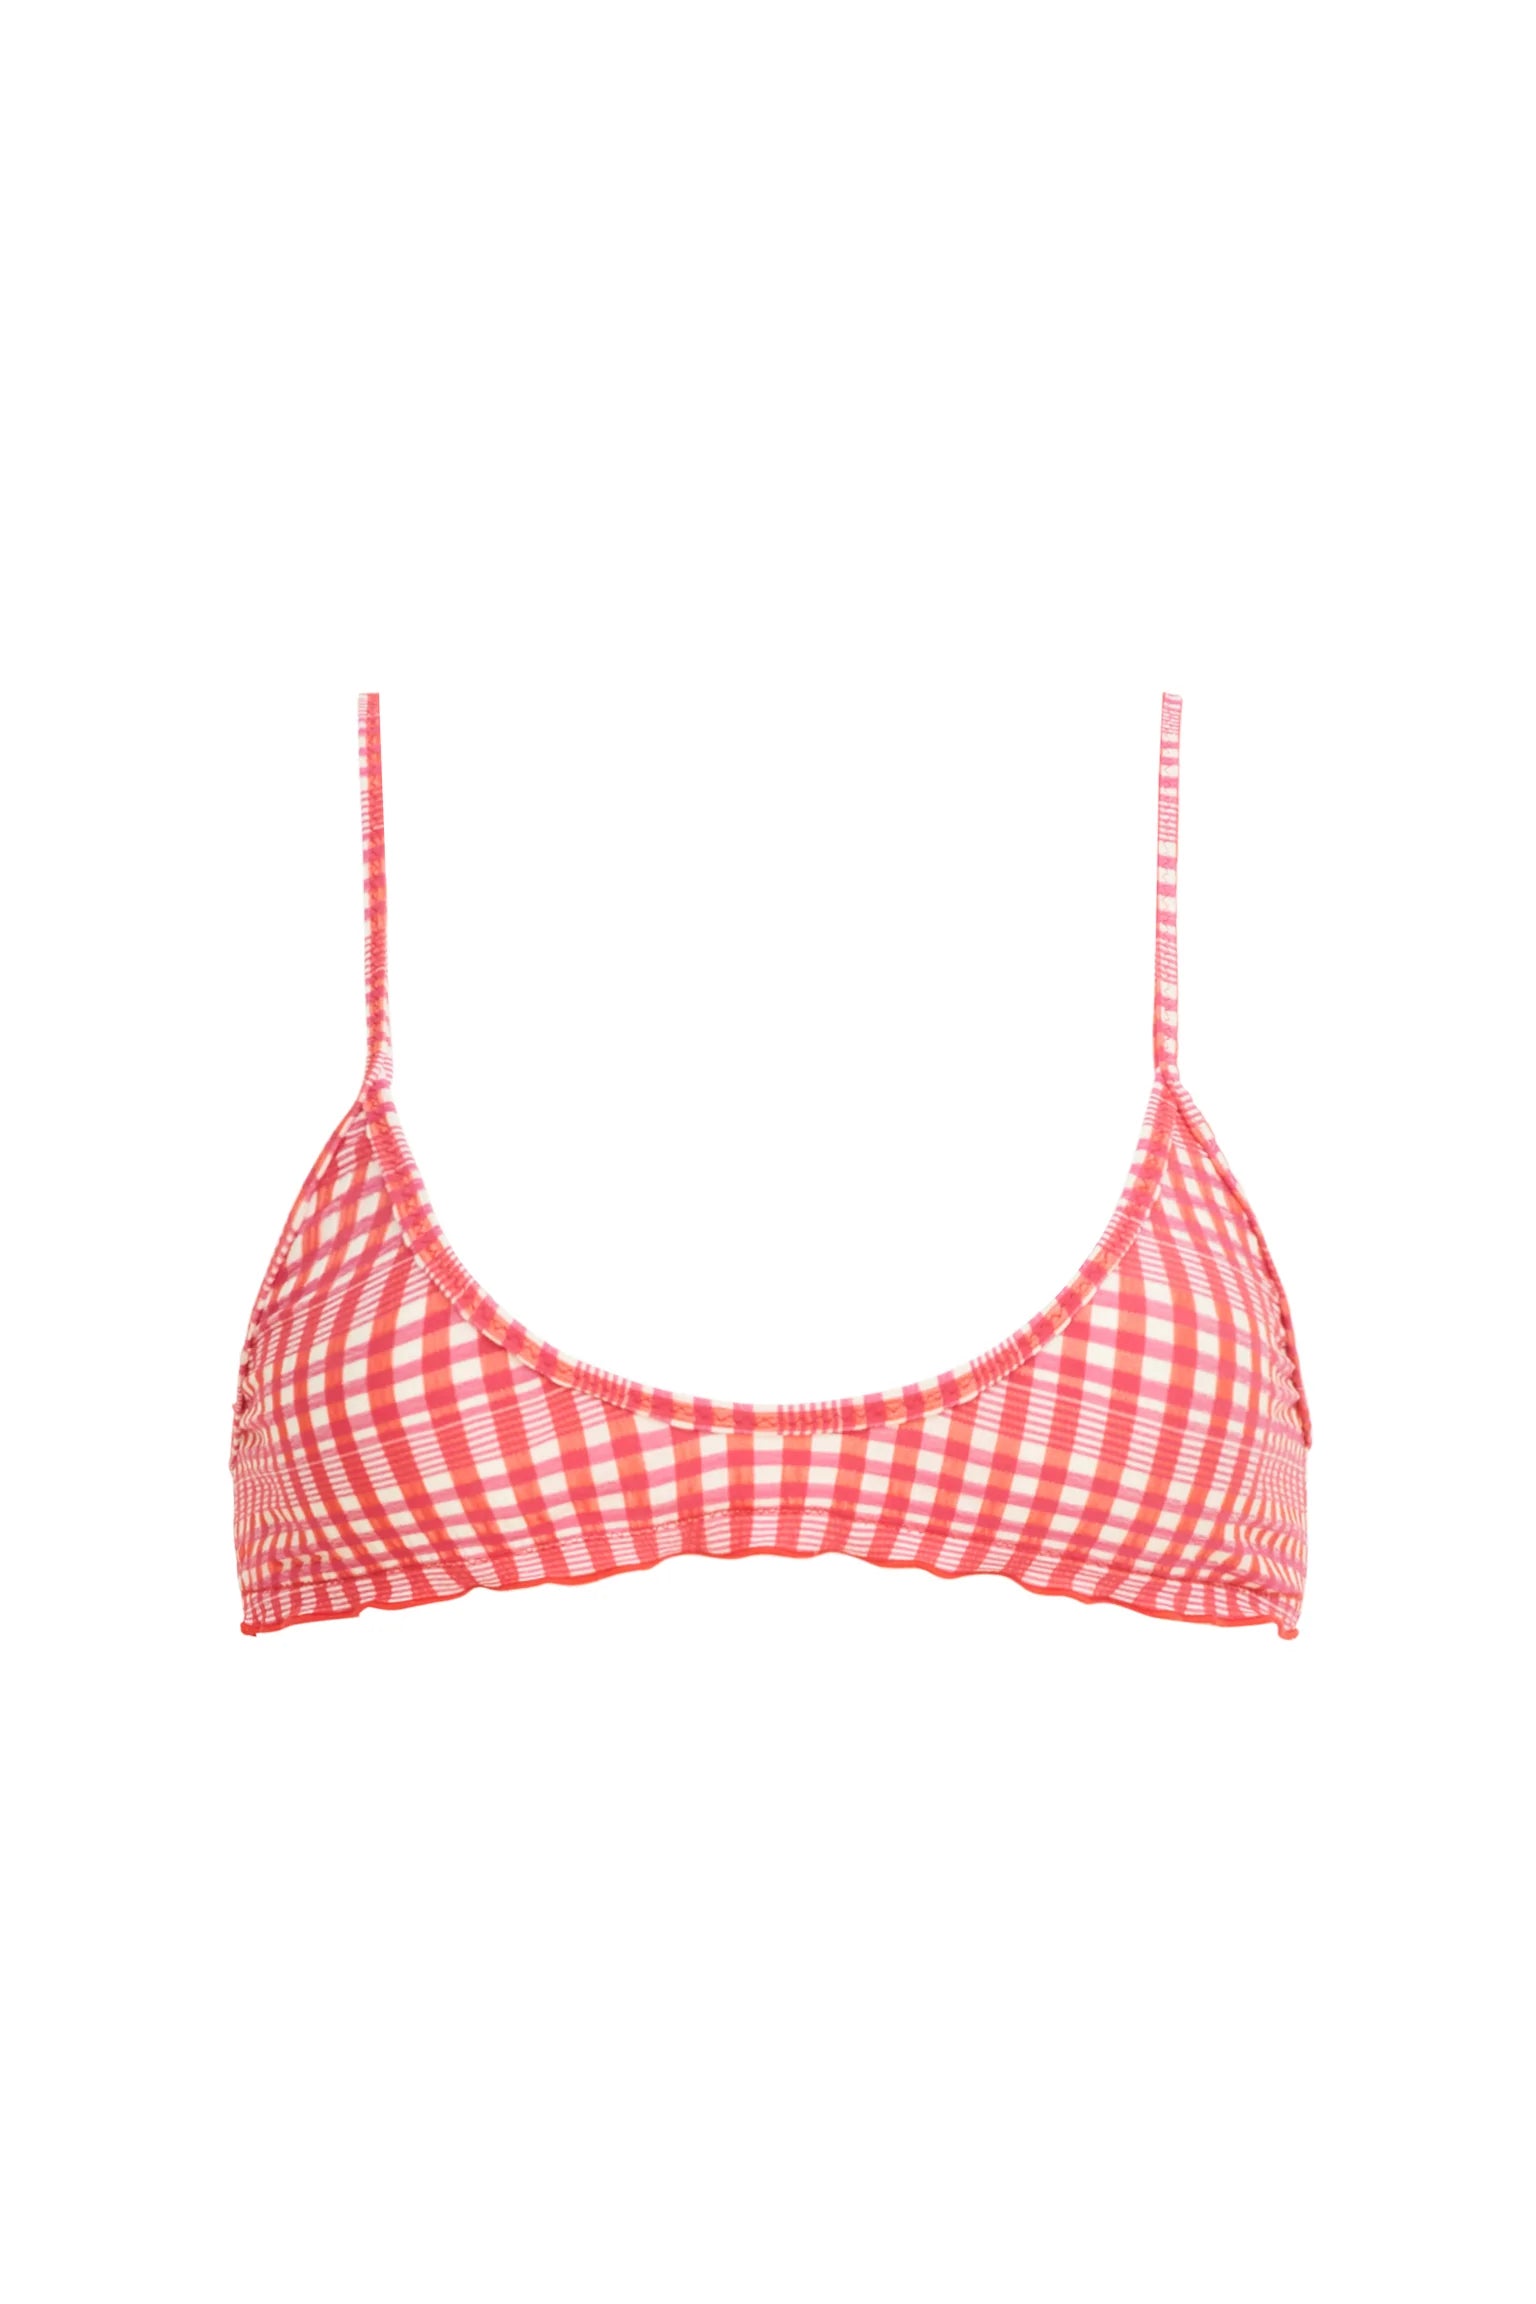 rio top in pink picnic - The Iconic Issue